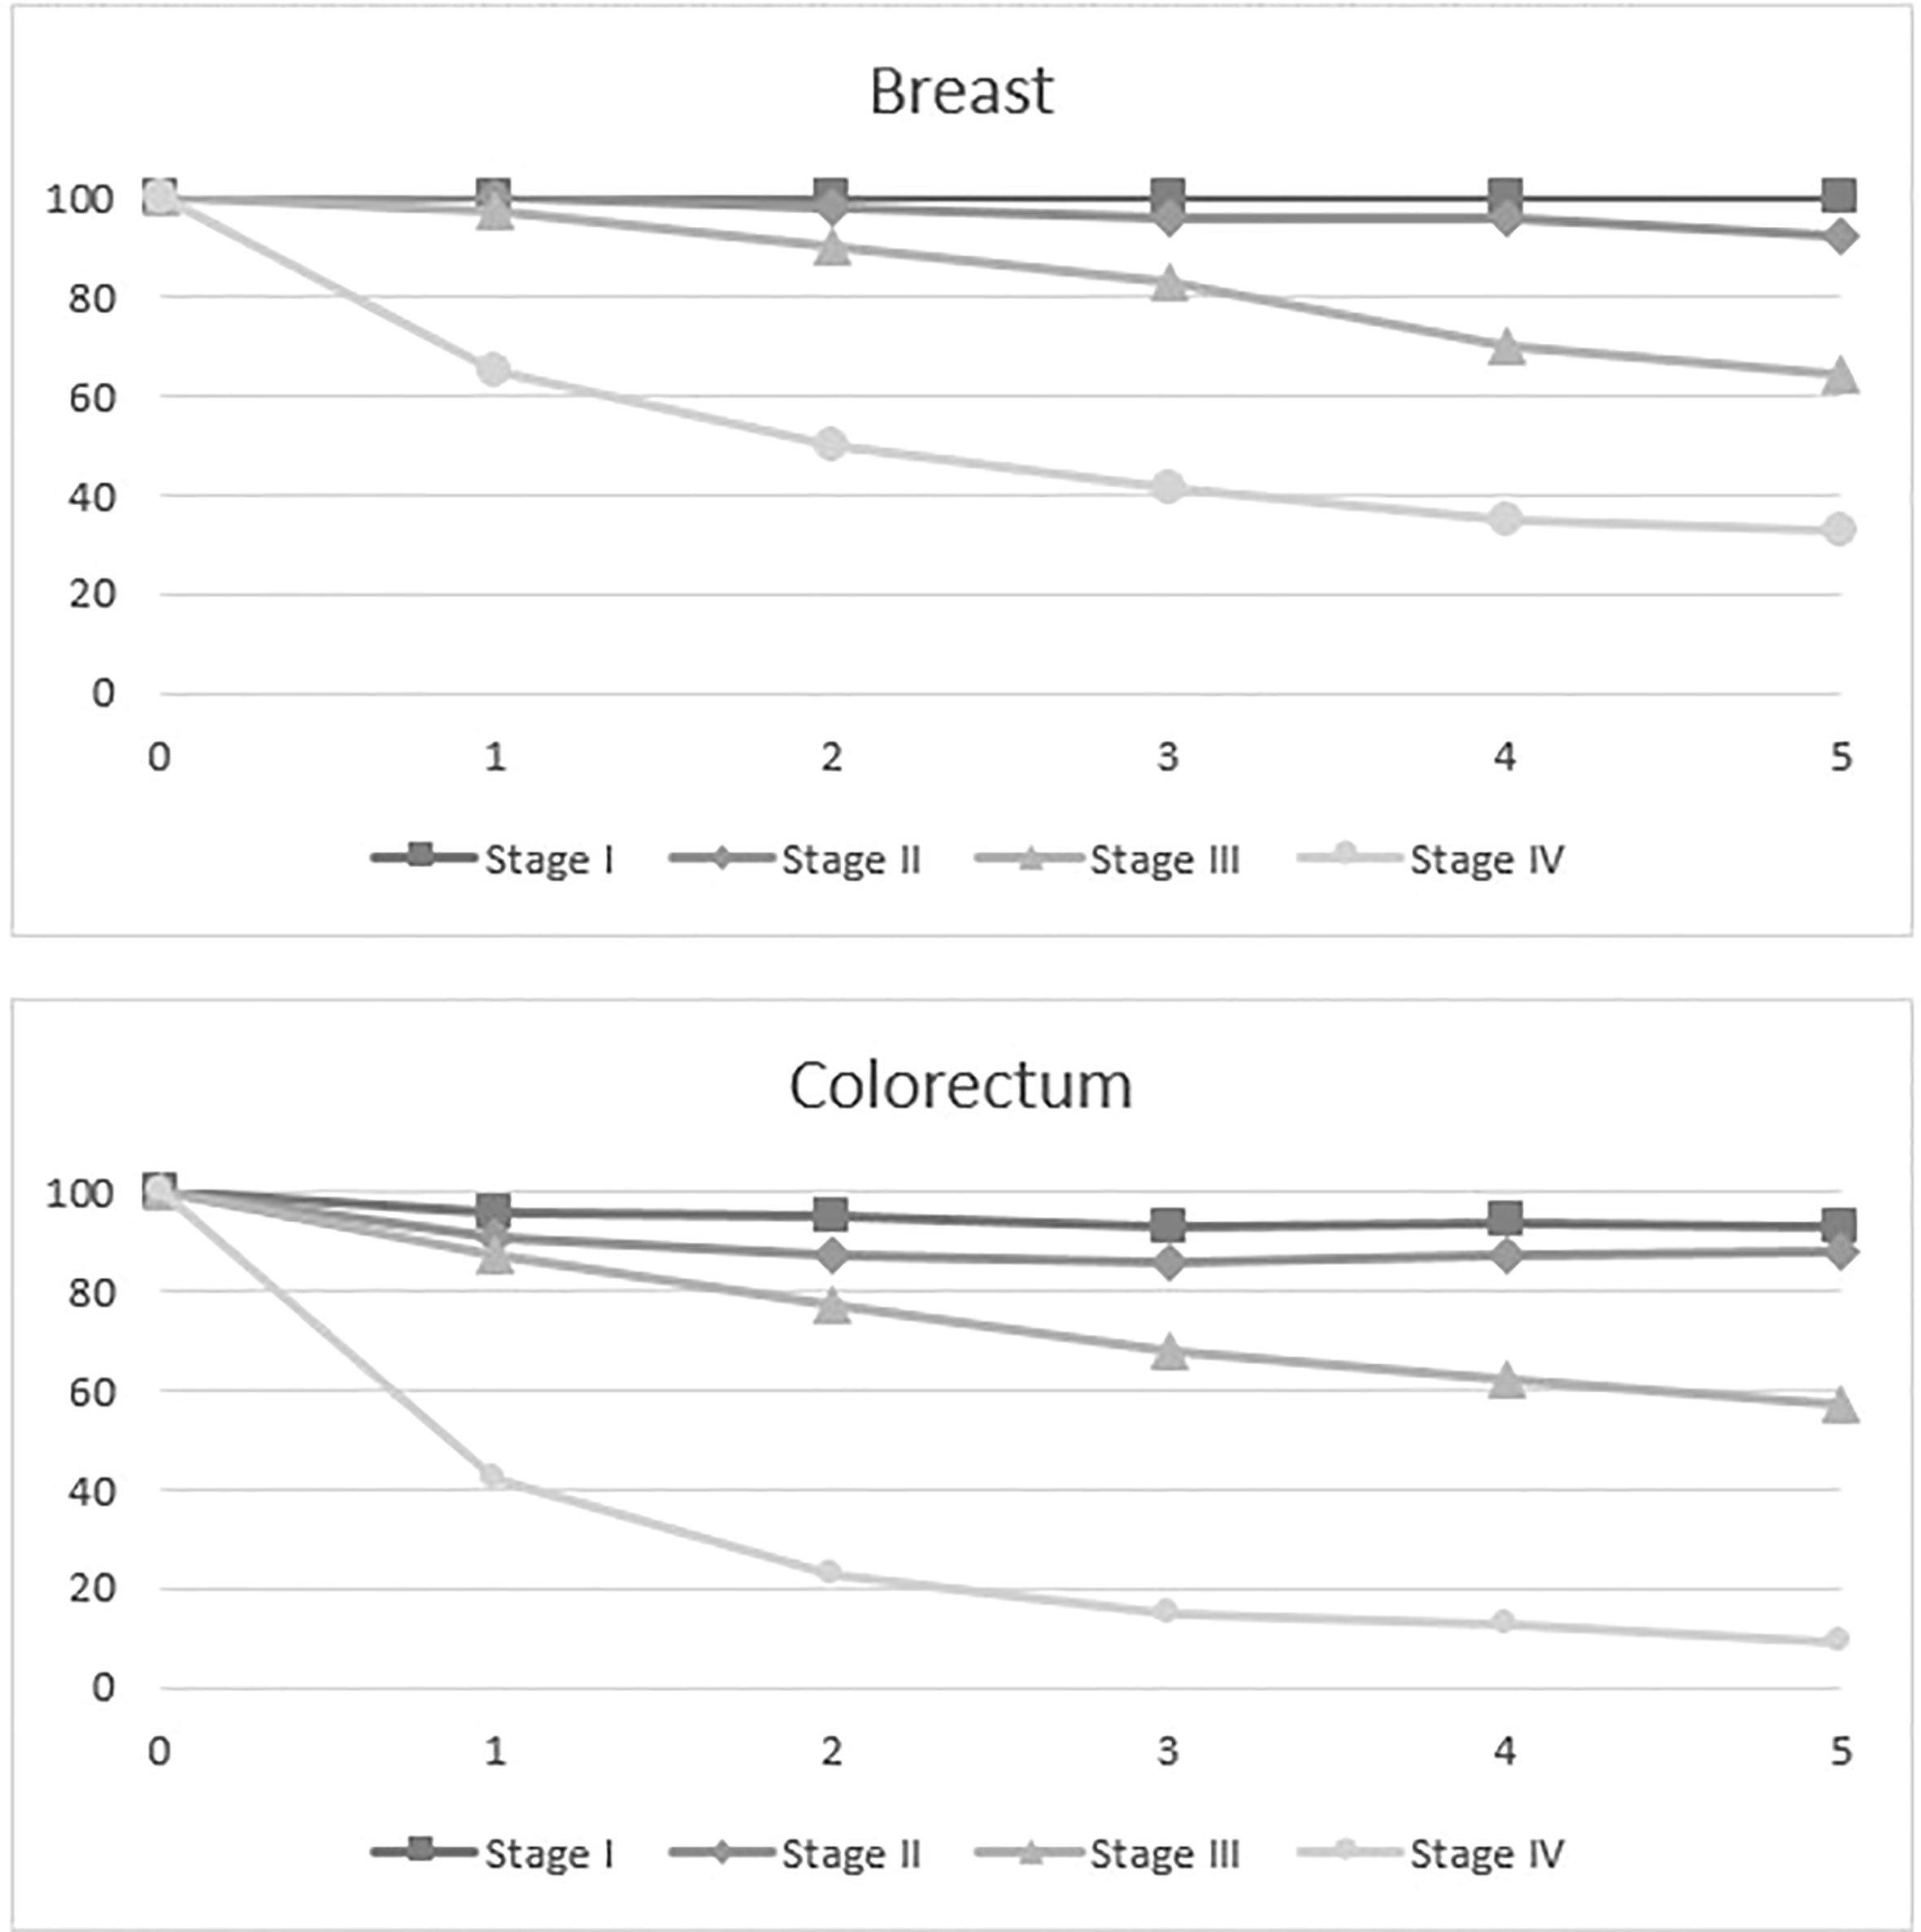 Breast Cancer Stages 0, 1, 2, 3 and 4